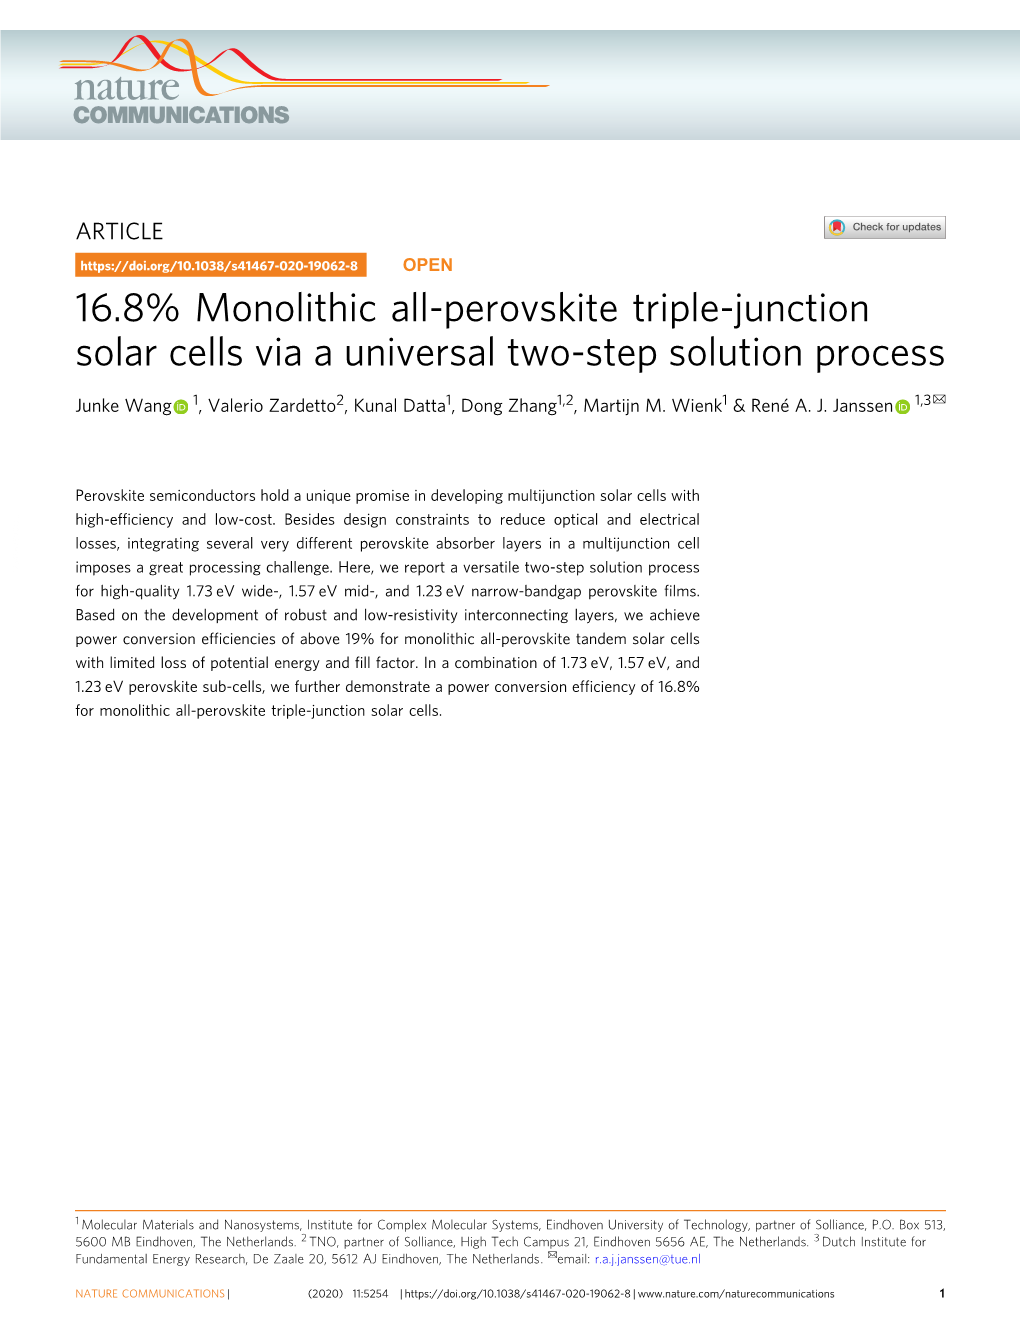 16.8% Monolithic All-Perovskite Triple-Junction Solar Cells Via a Universal Two-Step Solution Process